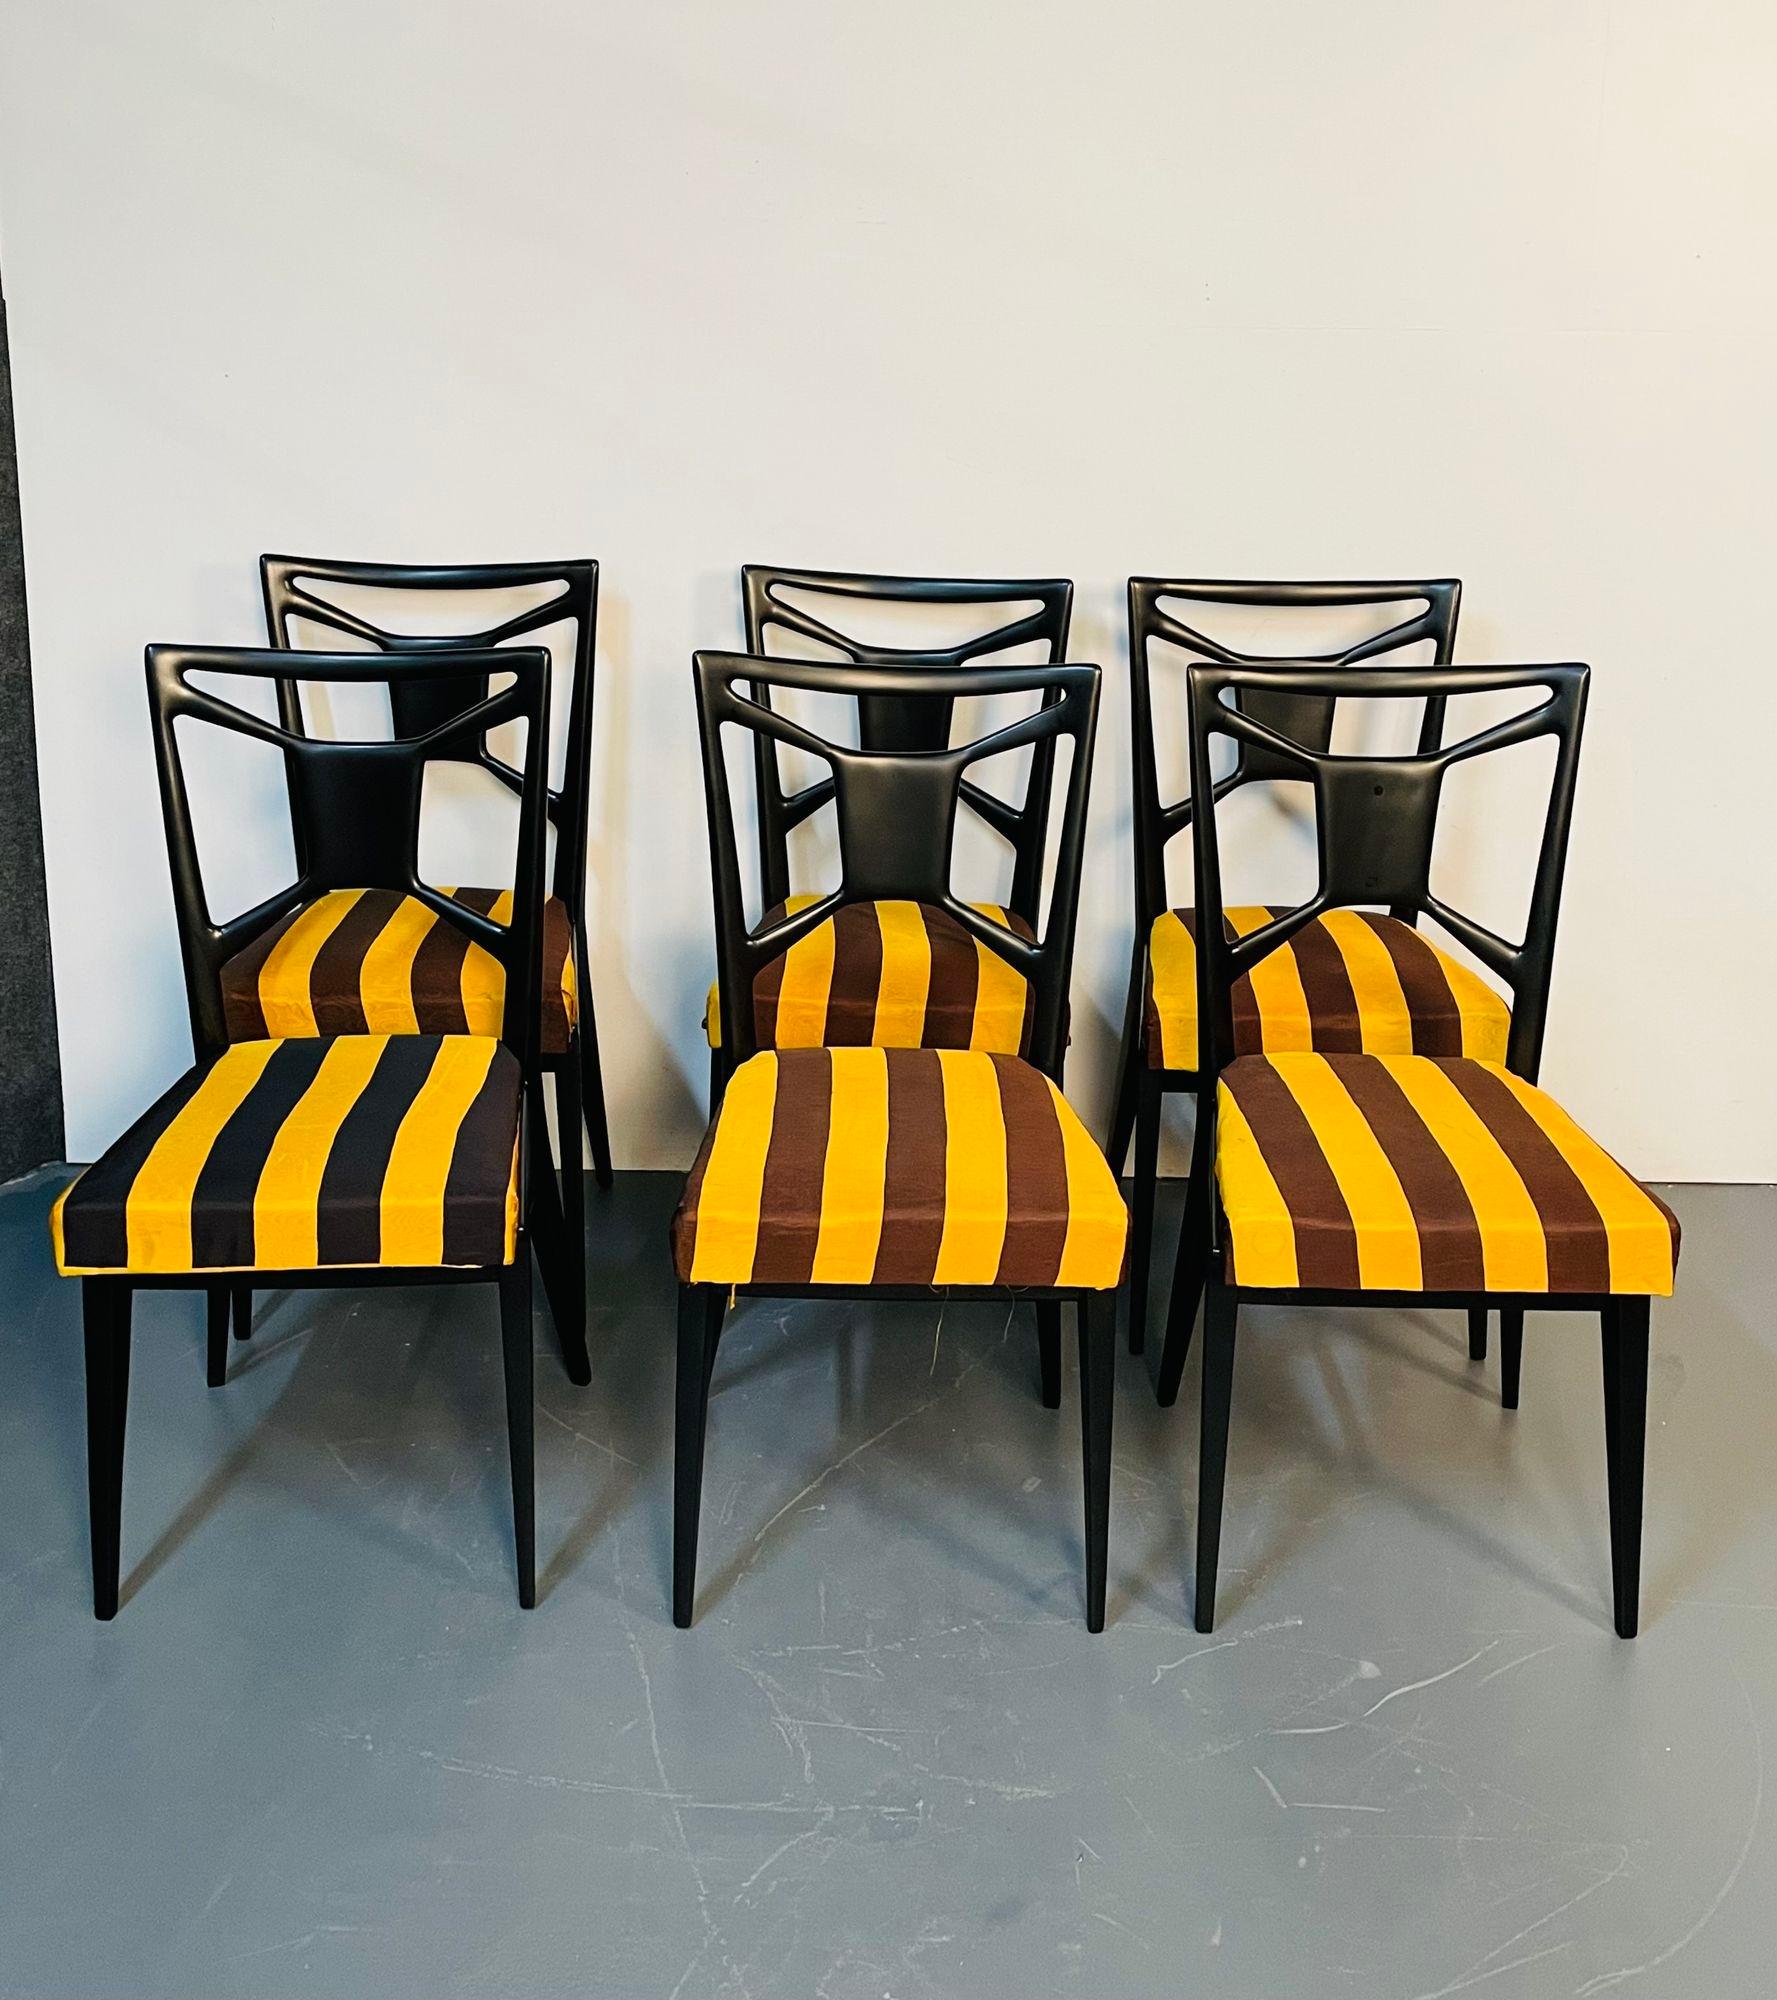 Six Italian Mid-Century Modern mahogany dining / side chairs, Ico Parisi Style
 
Six solid dark mahogany wood dining or accent chairs having 'X' form backs and comfortable striped fabric seats. Each chair sits on four slightly tilted legs for